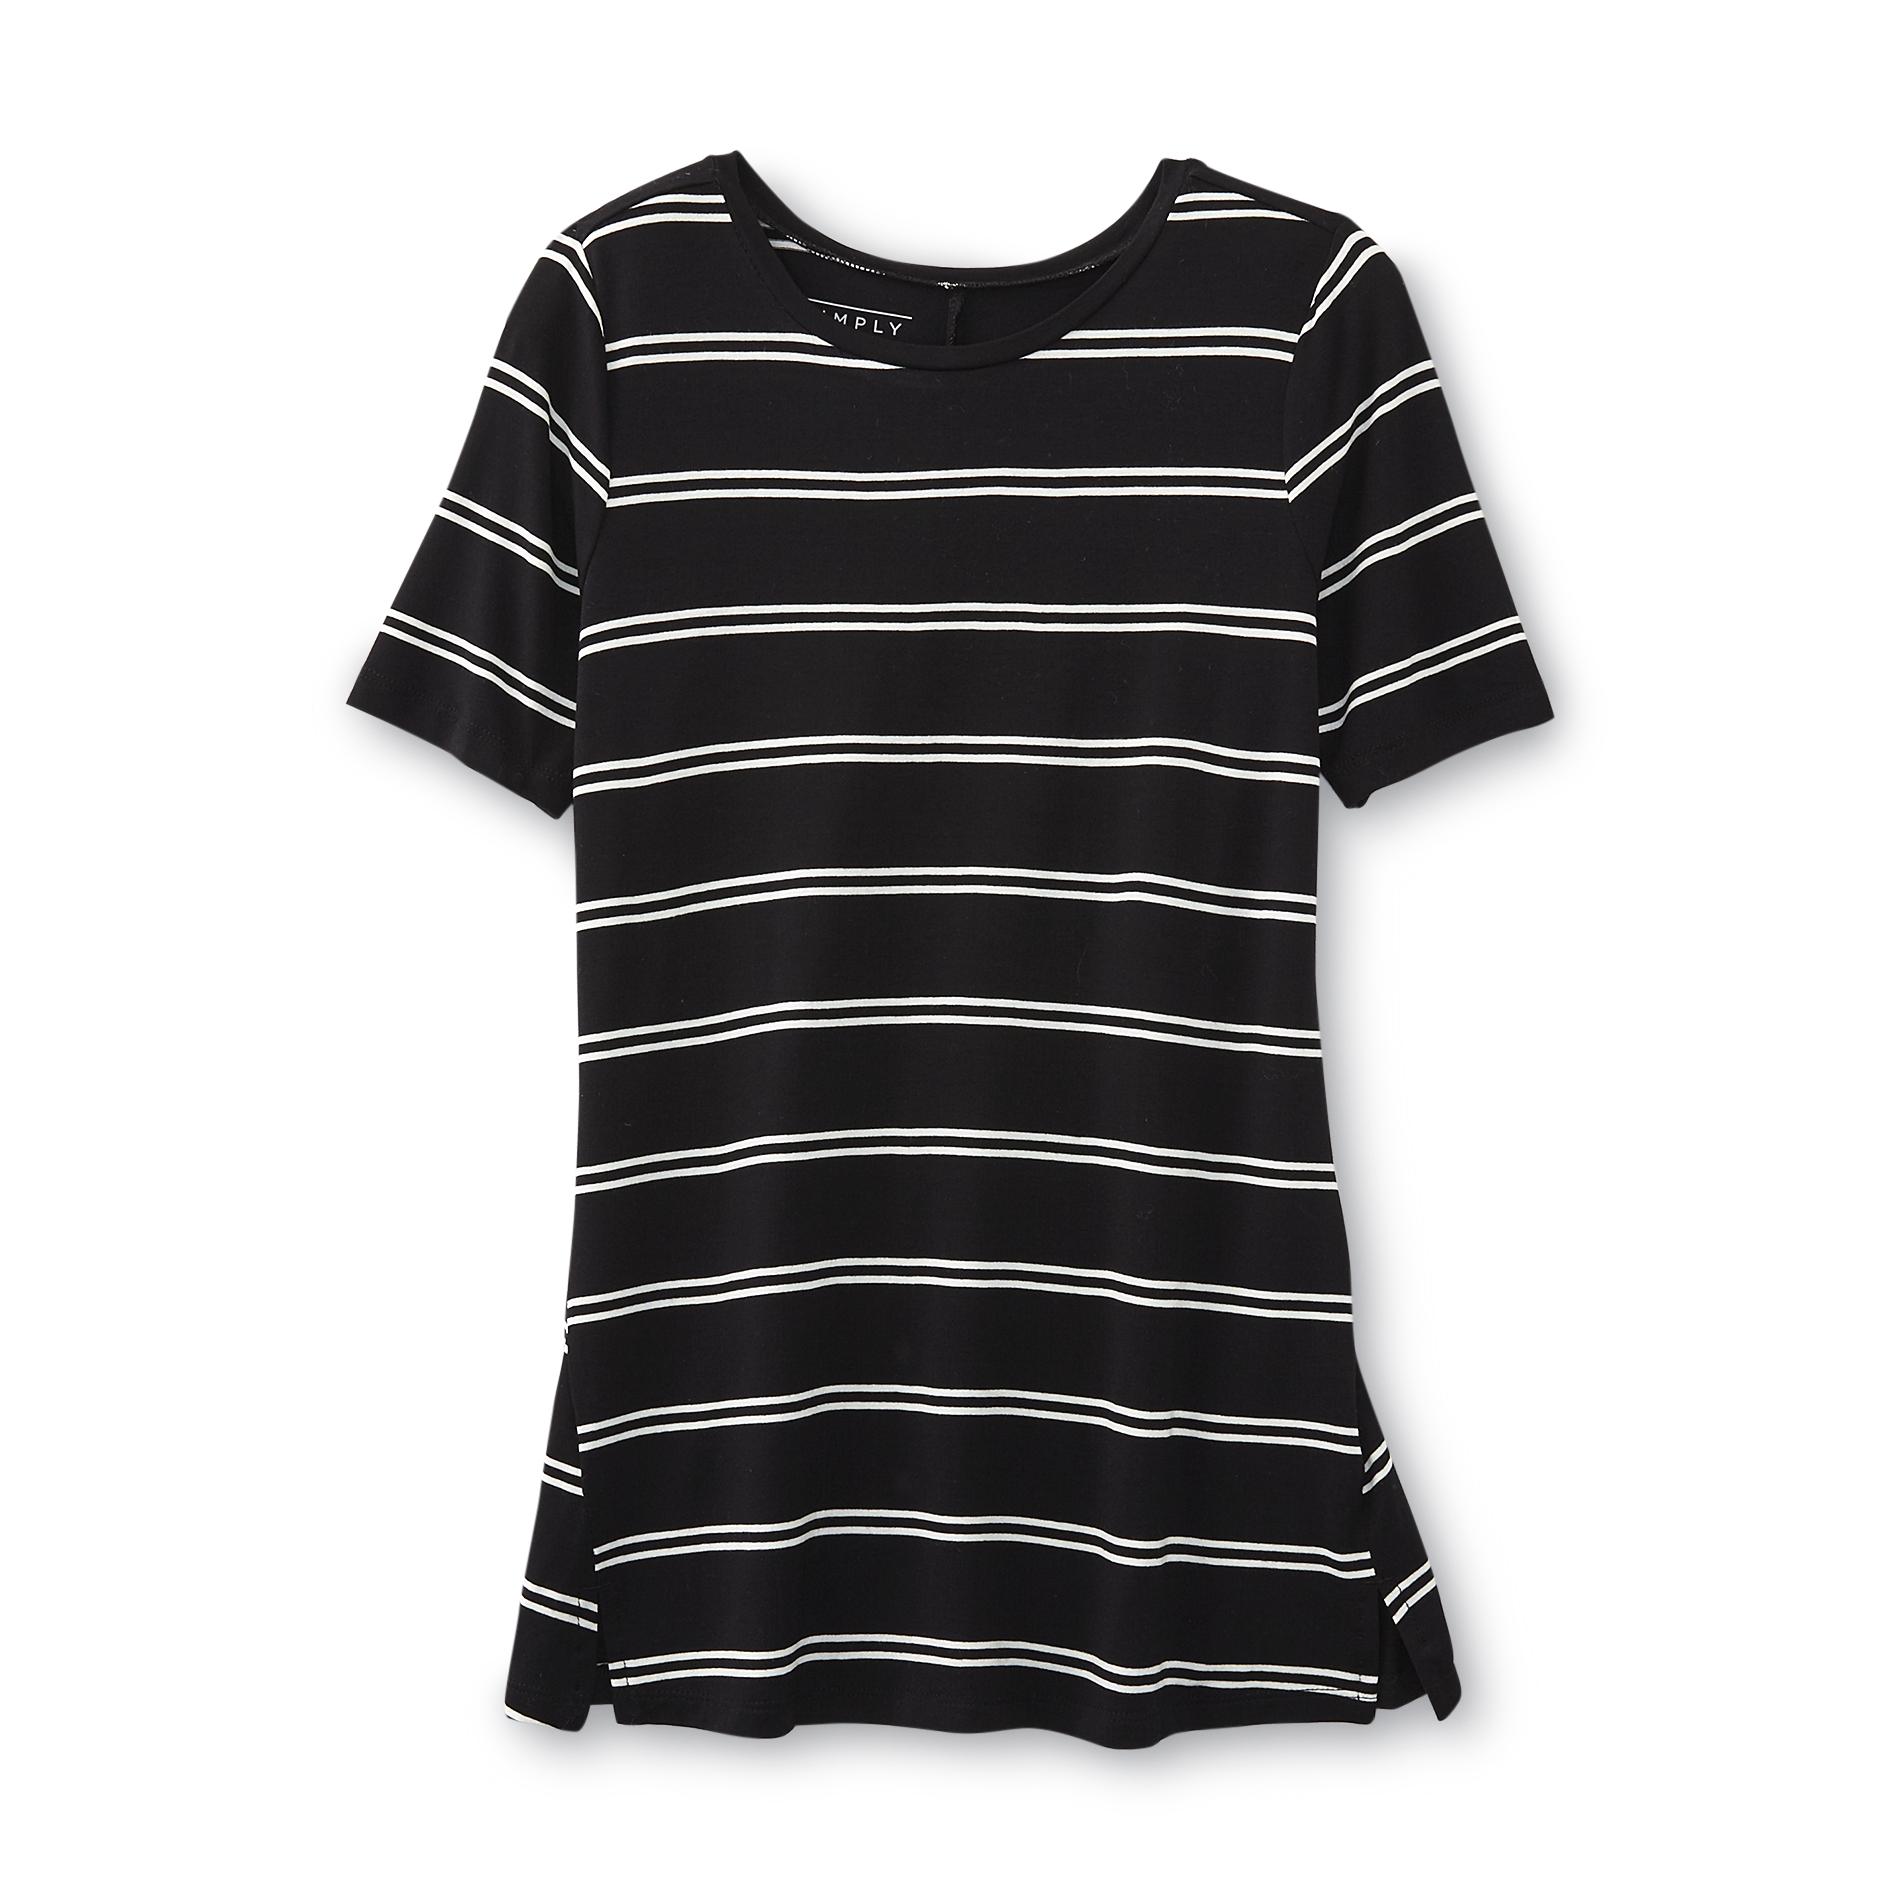 Simply Styled Girl's T-Shirt - Striped